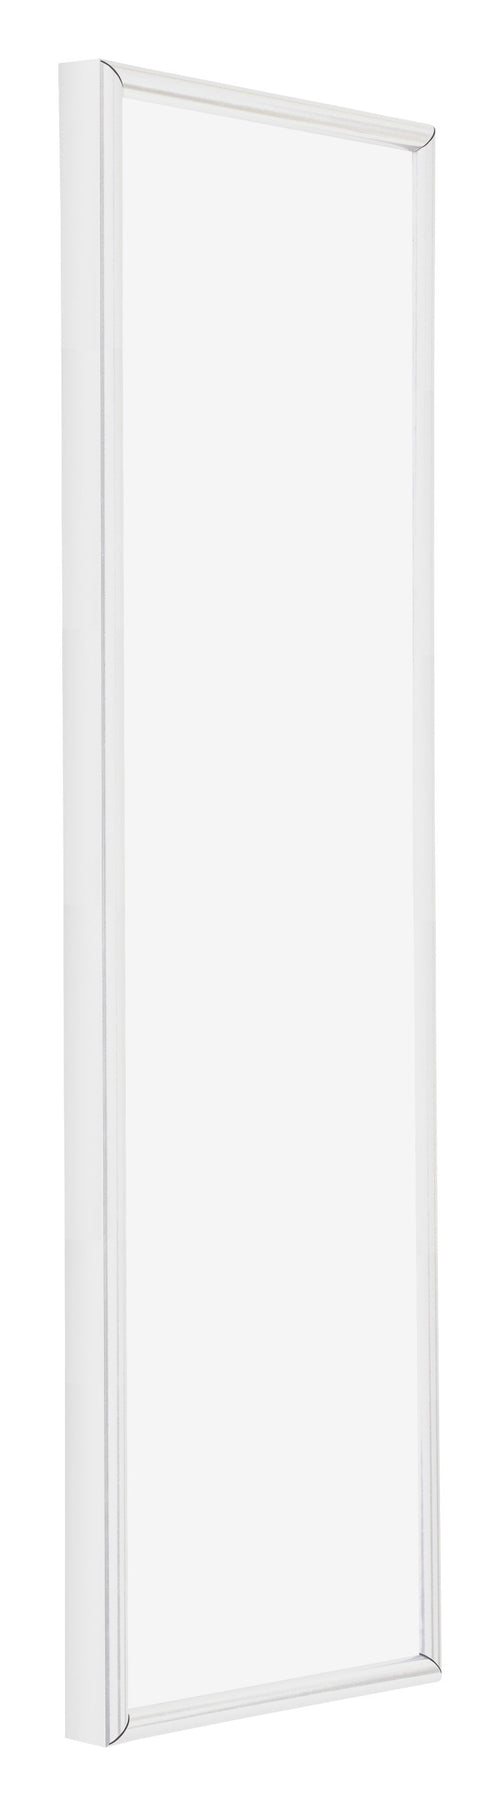 Annecy Plastic Photo Frame 20x60cm White High Gloss Front Oblique | Yourdecoration.com